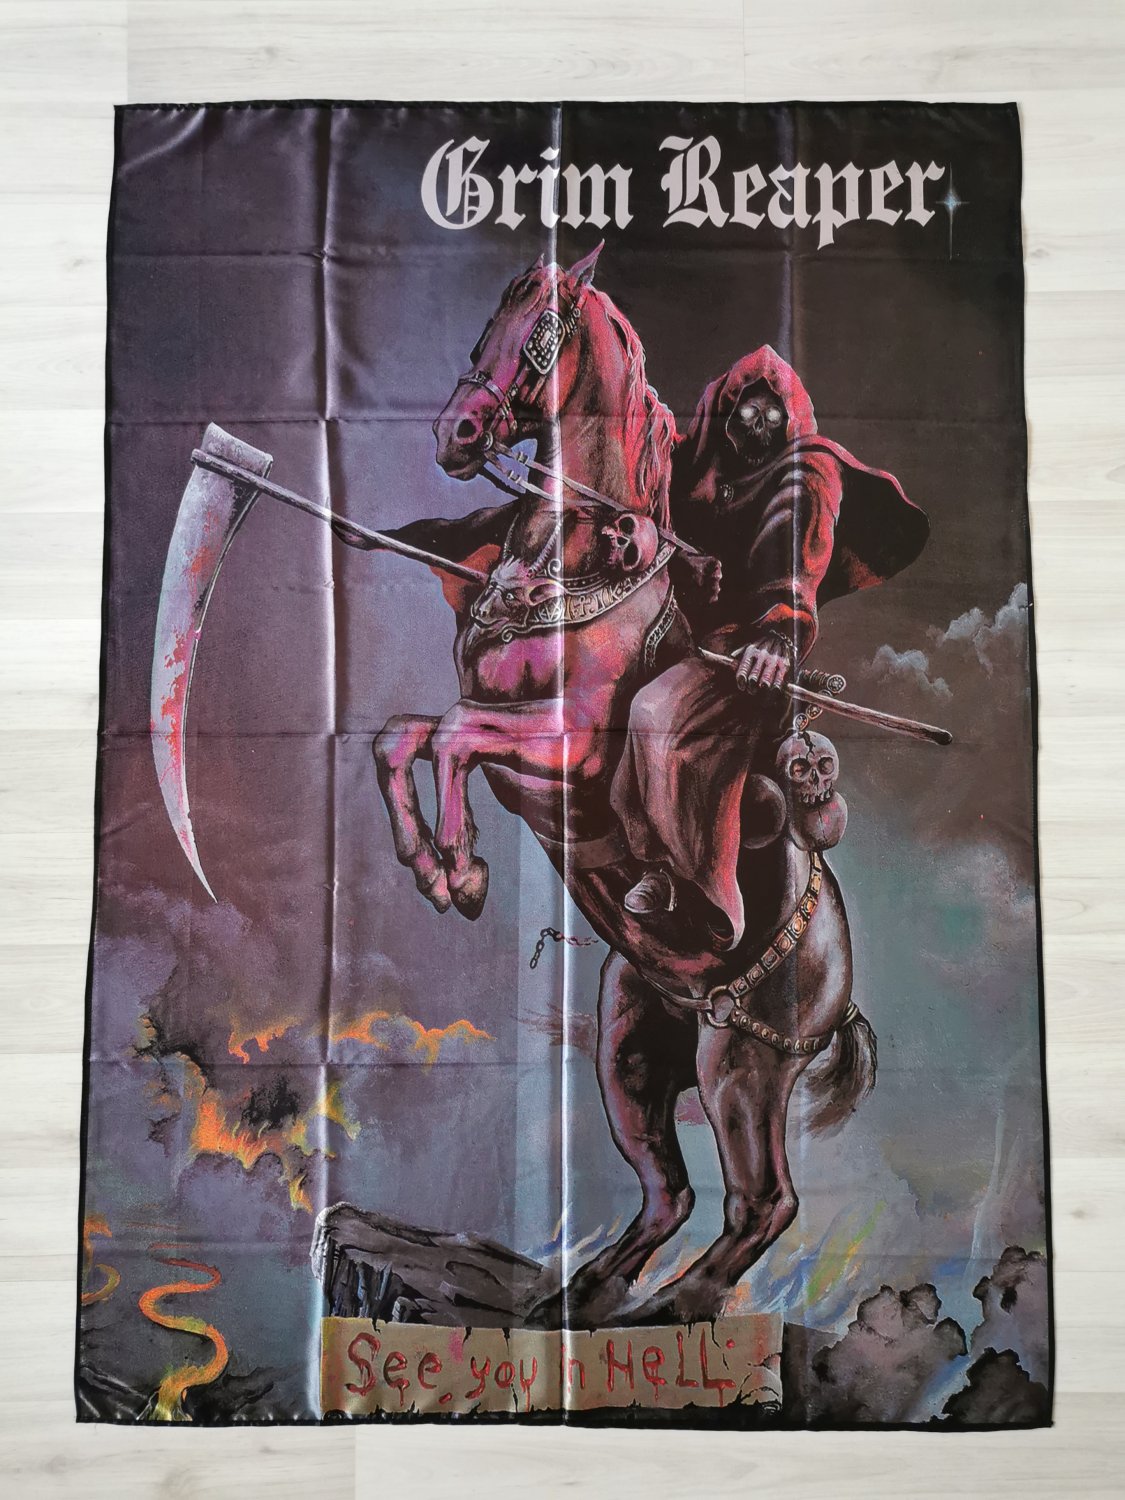 GRIM REAPER - See you in hell FLAG Heavy metal cloth poster NWOBHM